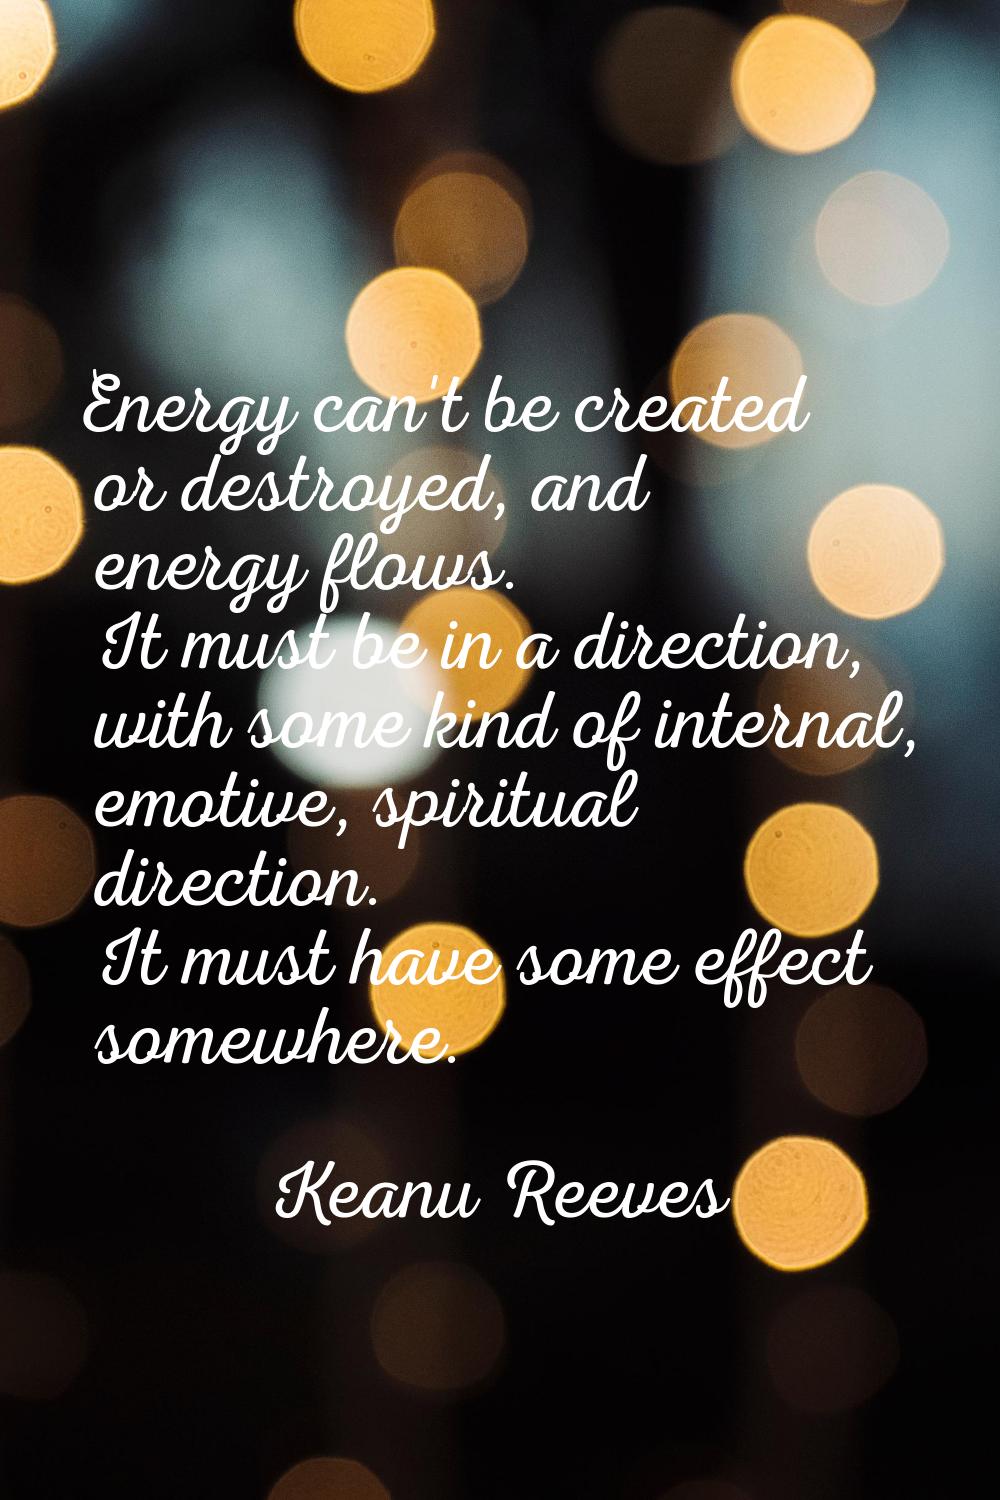 Energy can't be created or destroyed, and energy flows. It must be in a direction, with some kind o